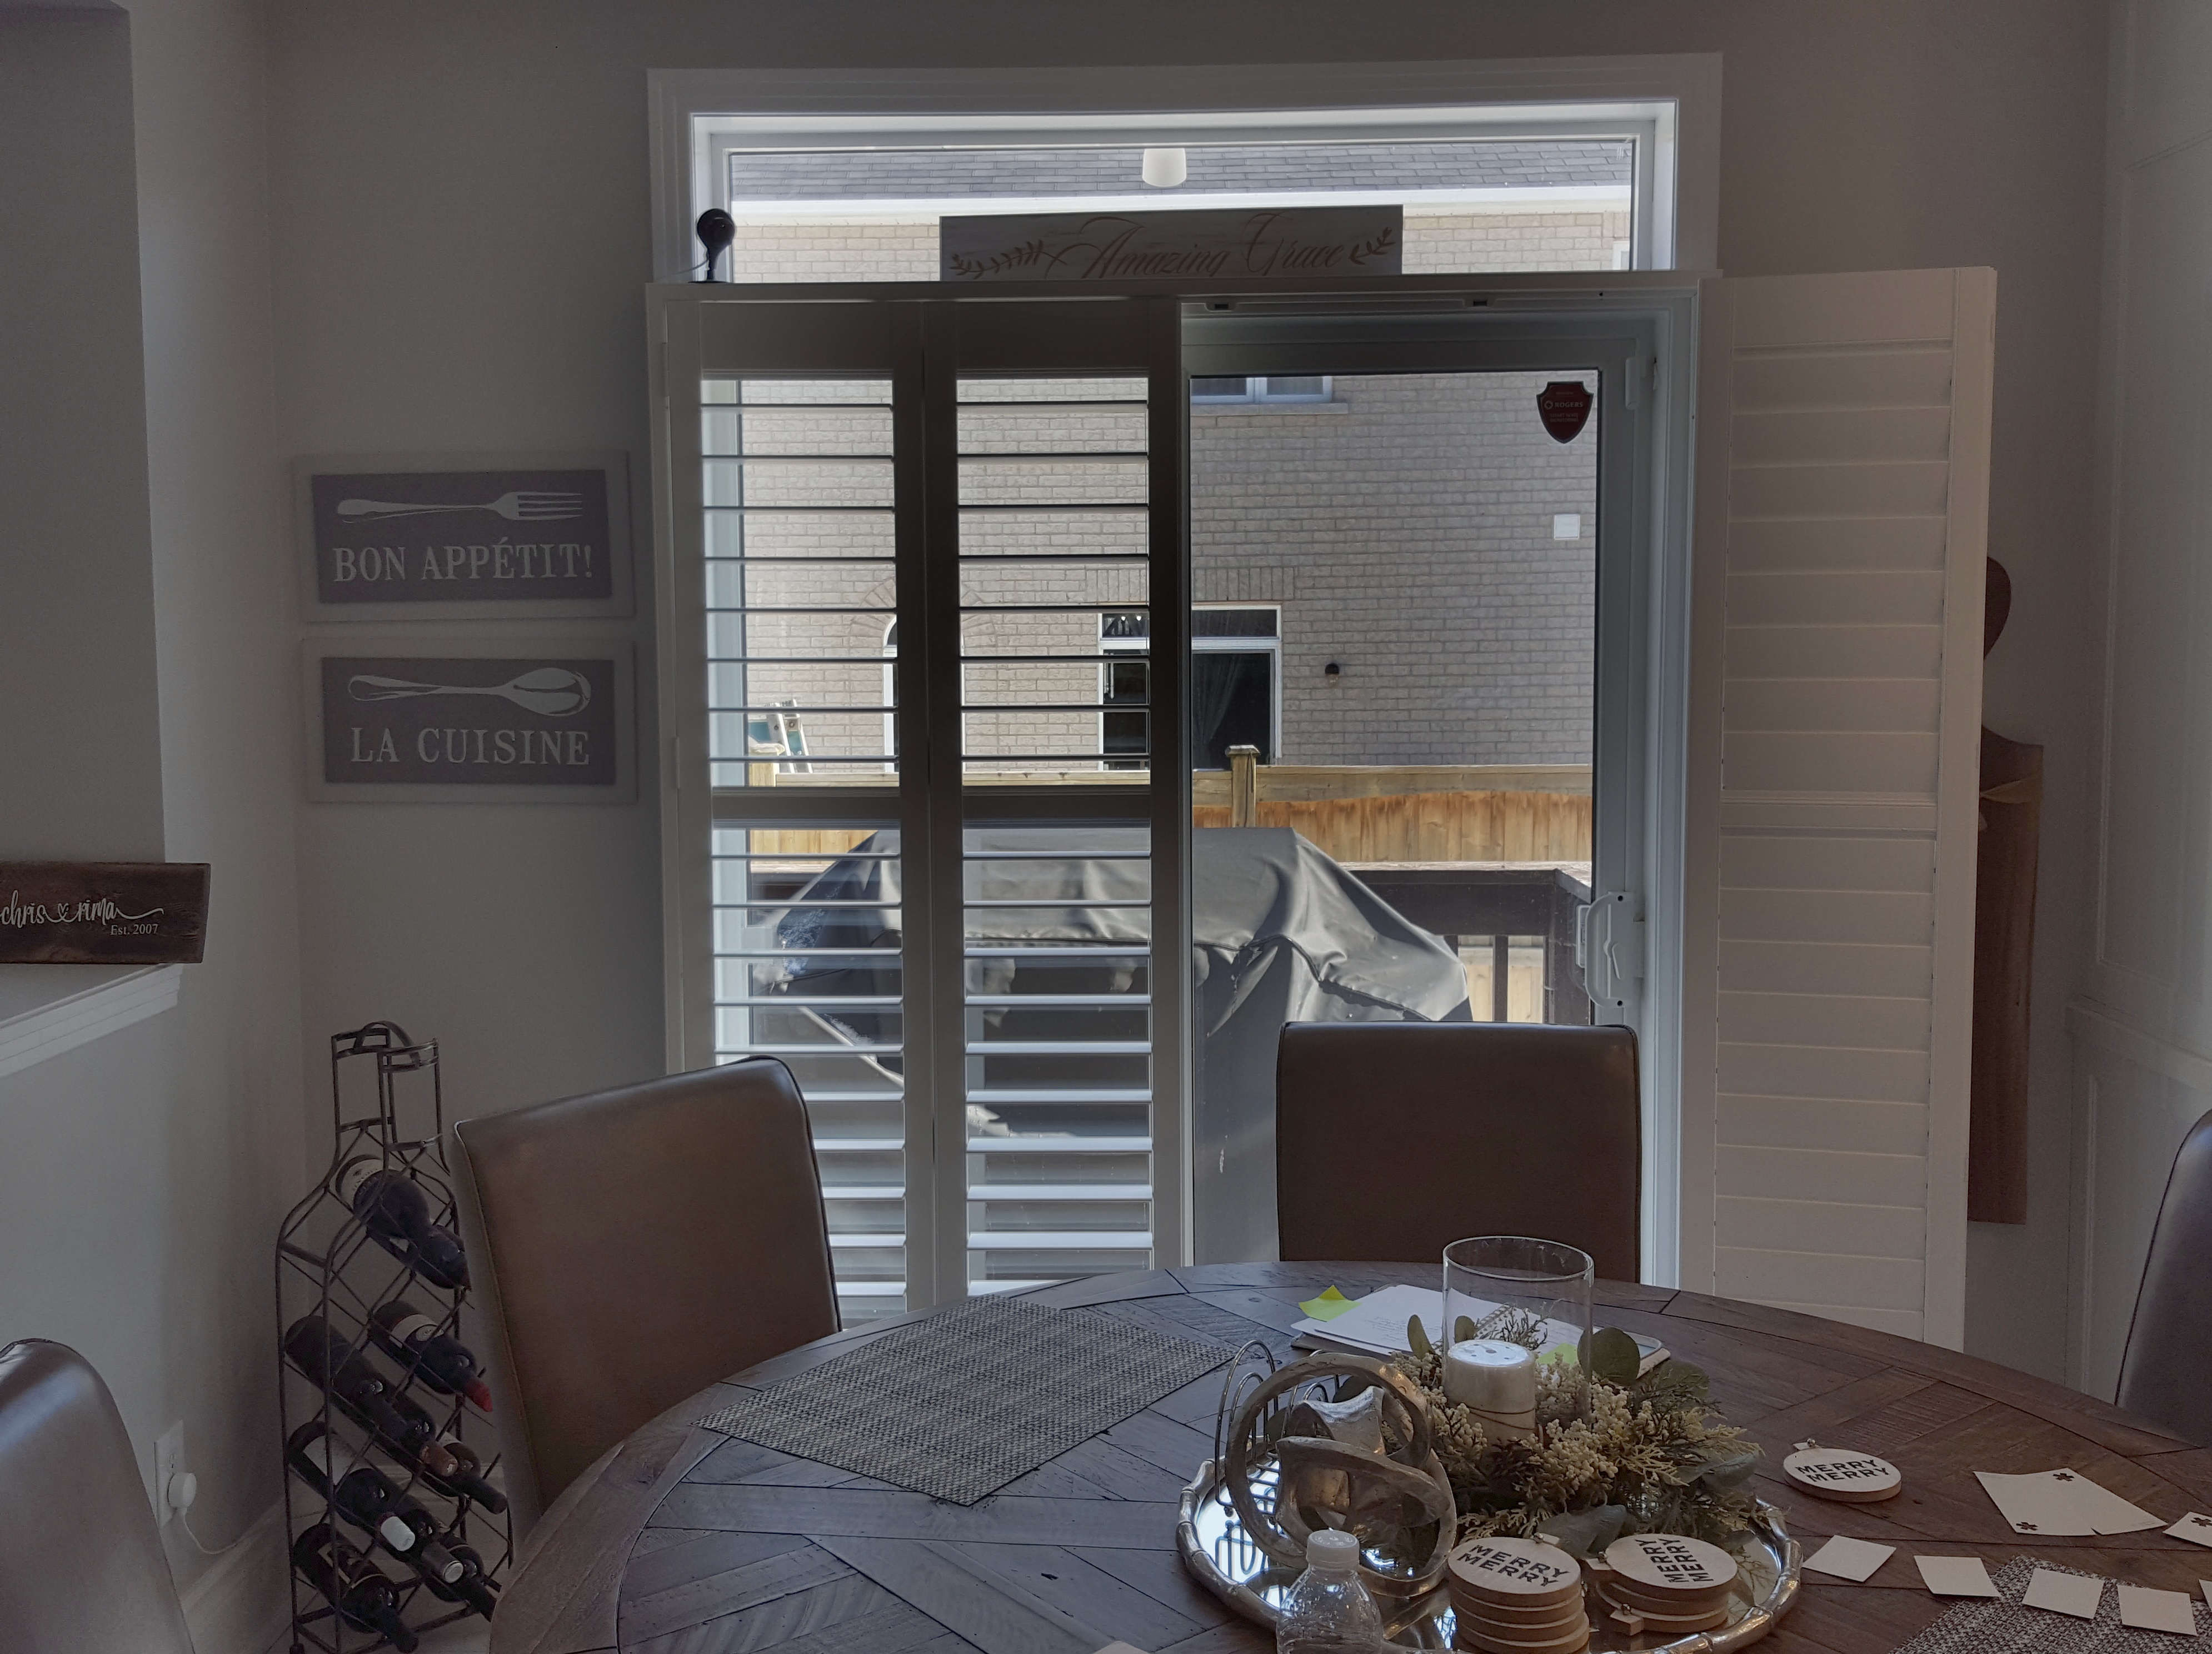 Images Budget Blinds of Richmond Hill